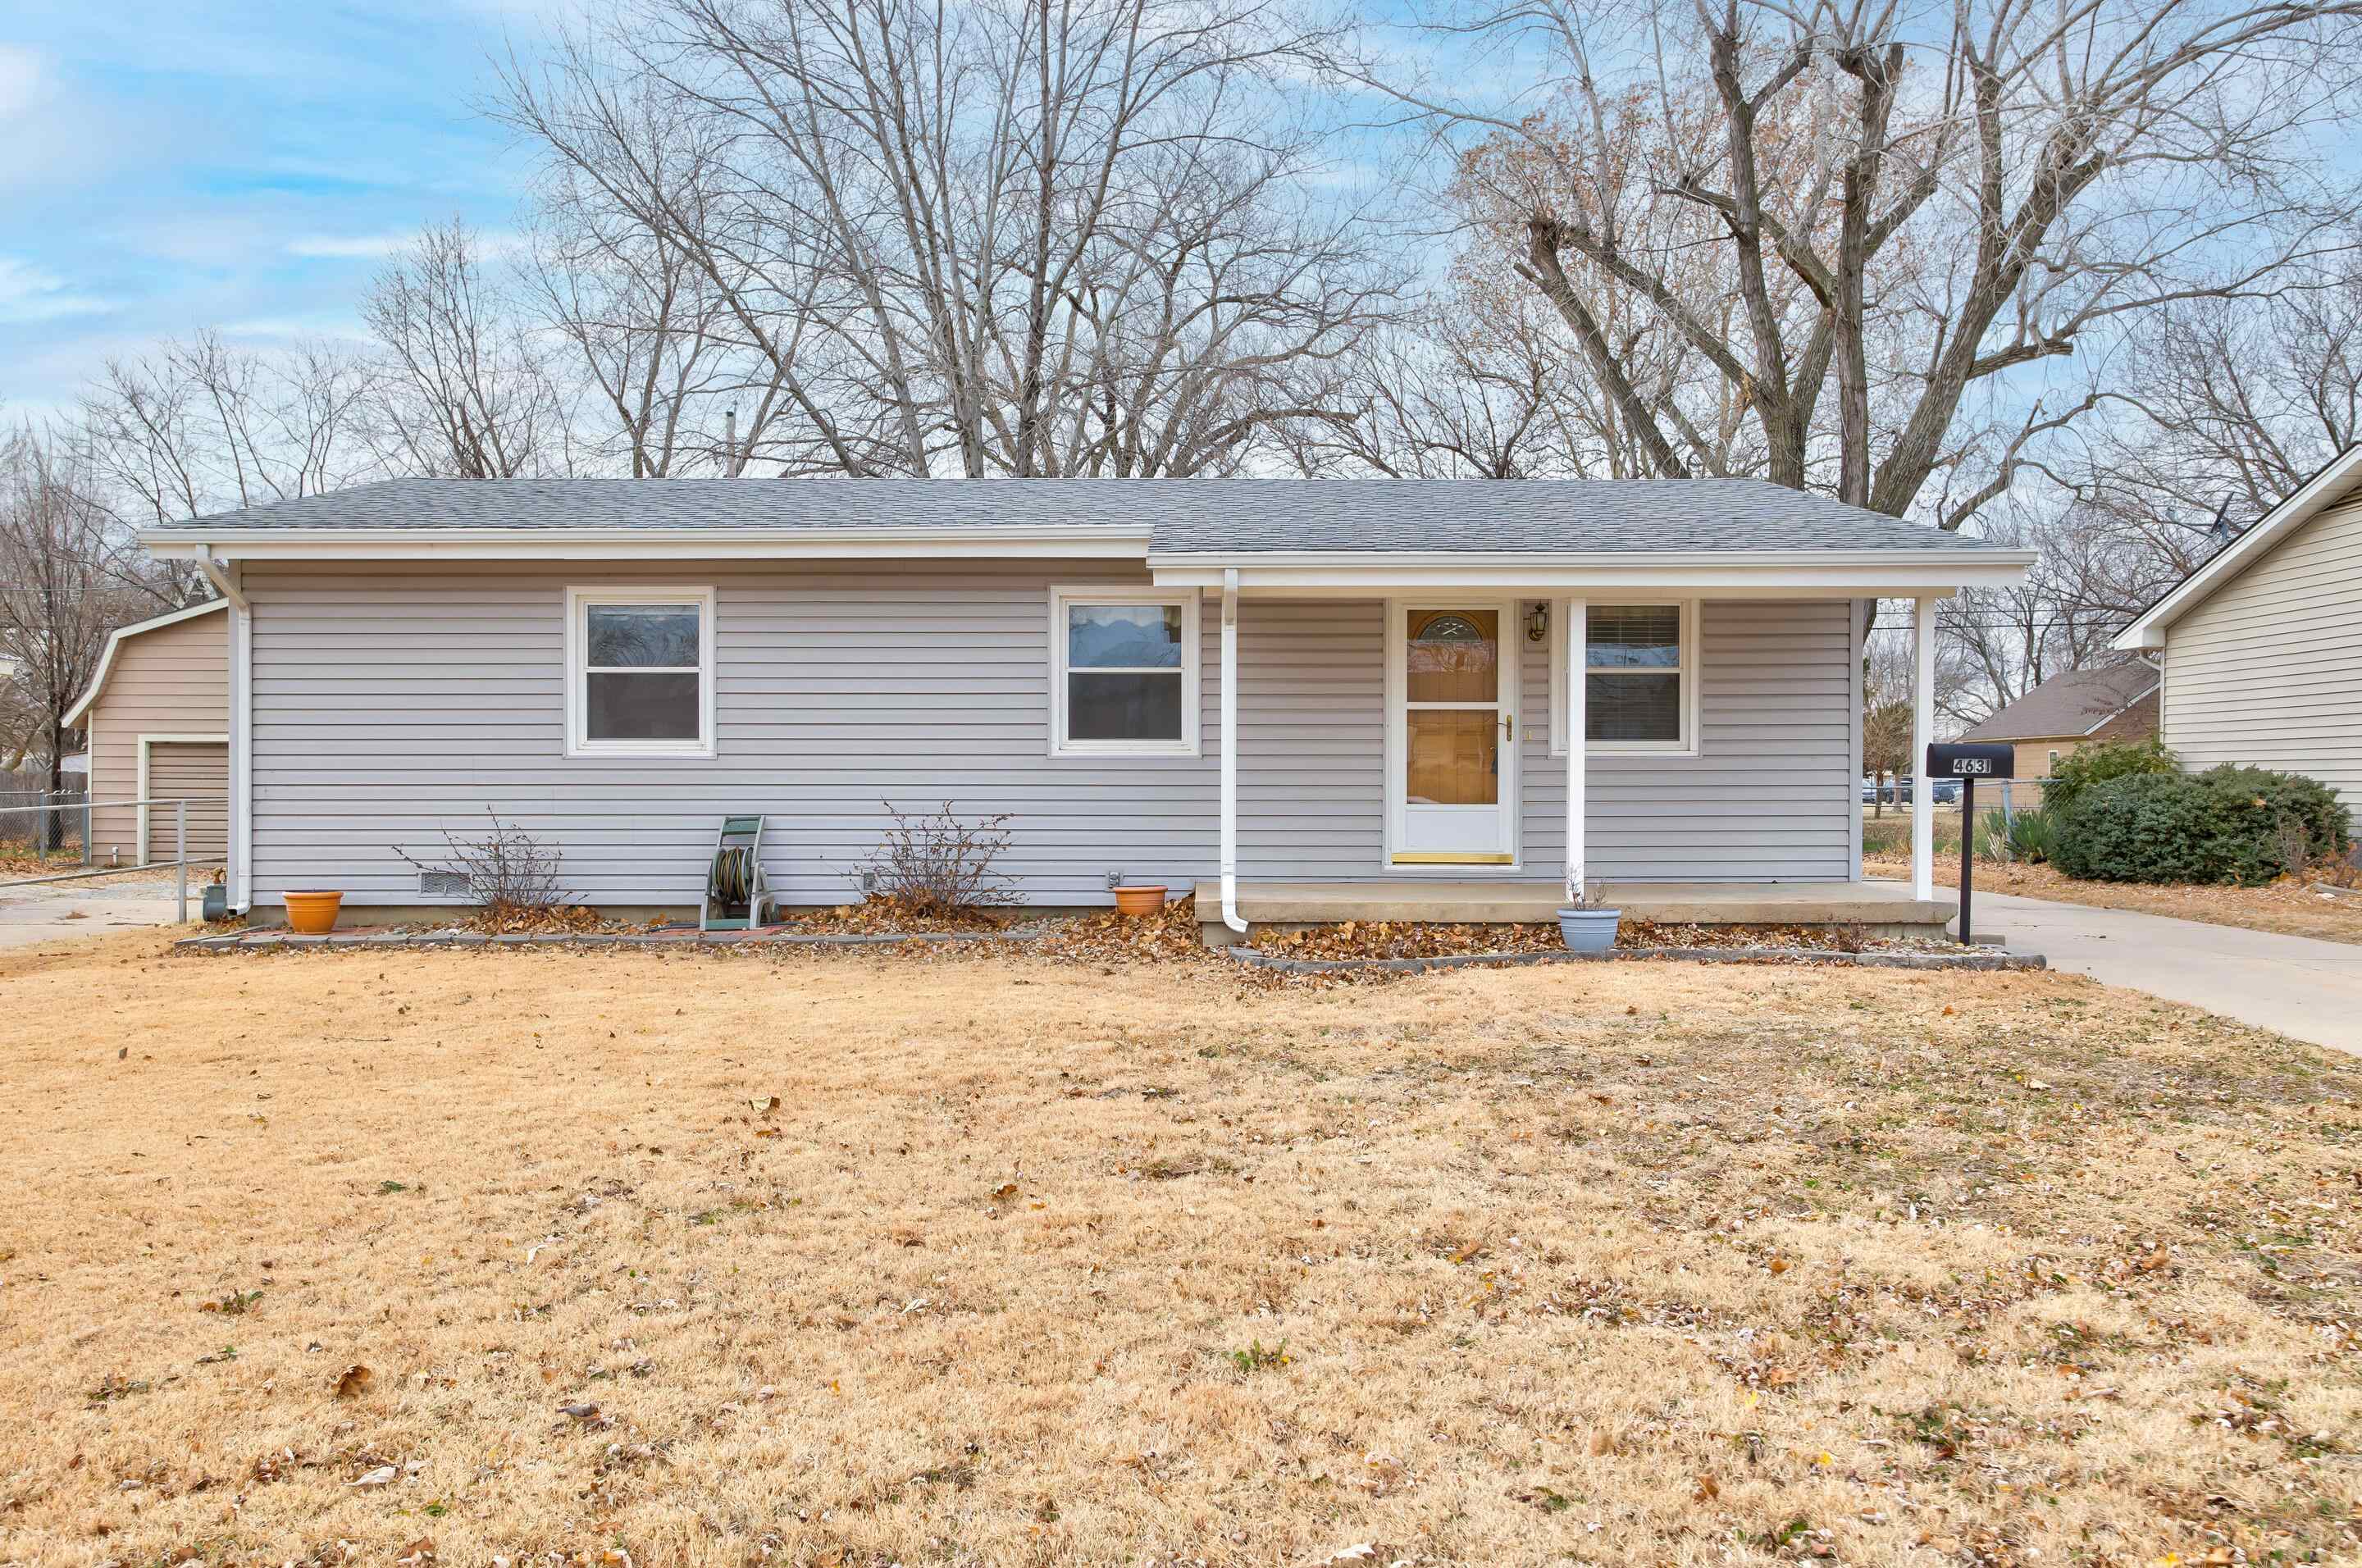 Check out this amazingly kept home in south Wichita. You will love it's convenient location, next to